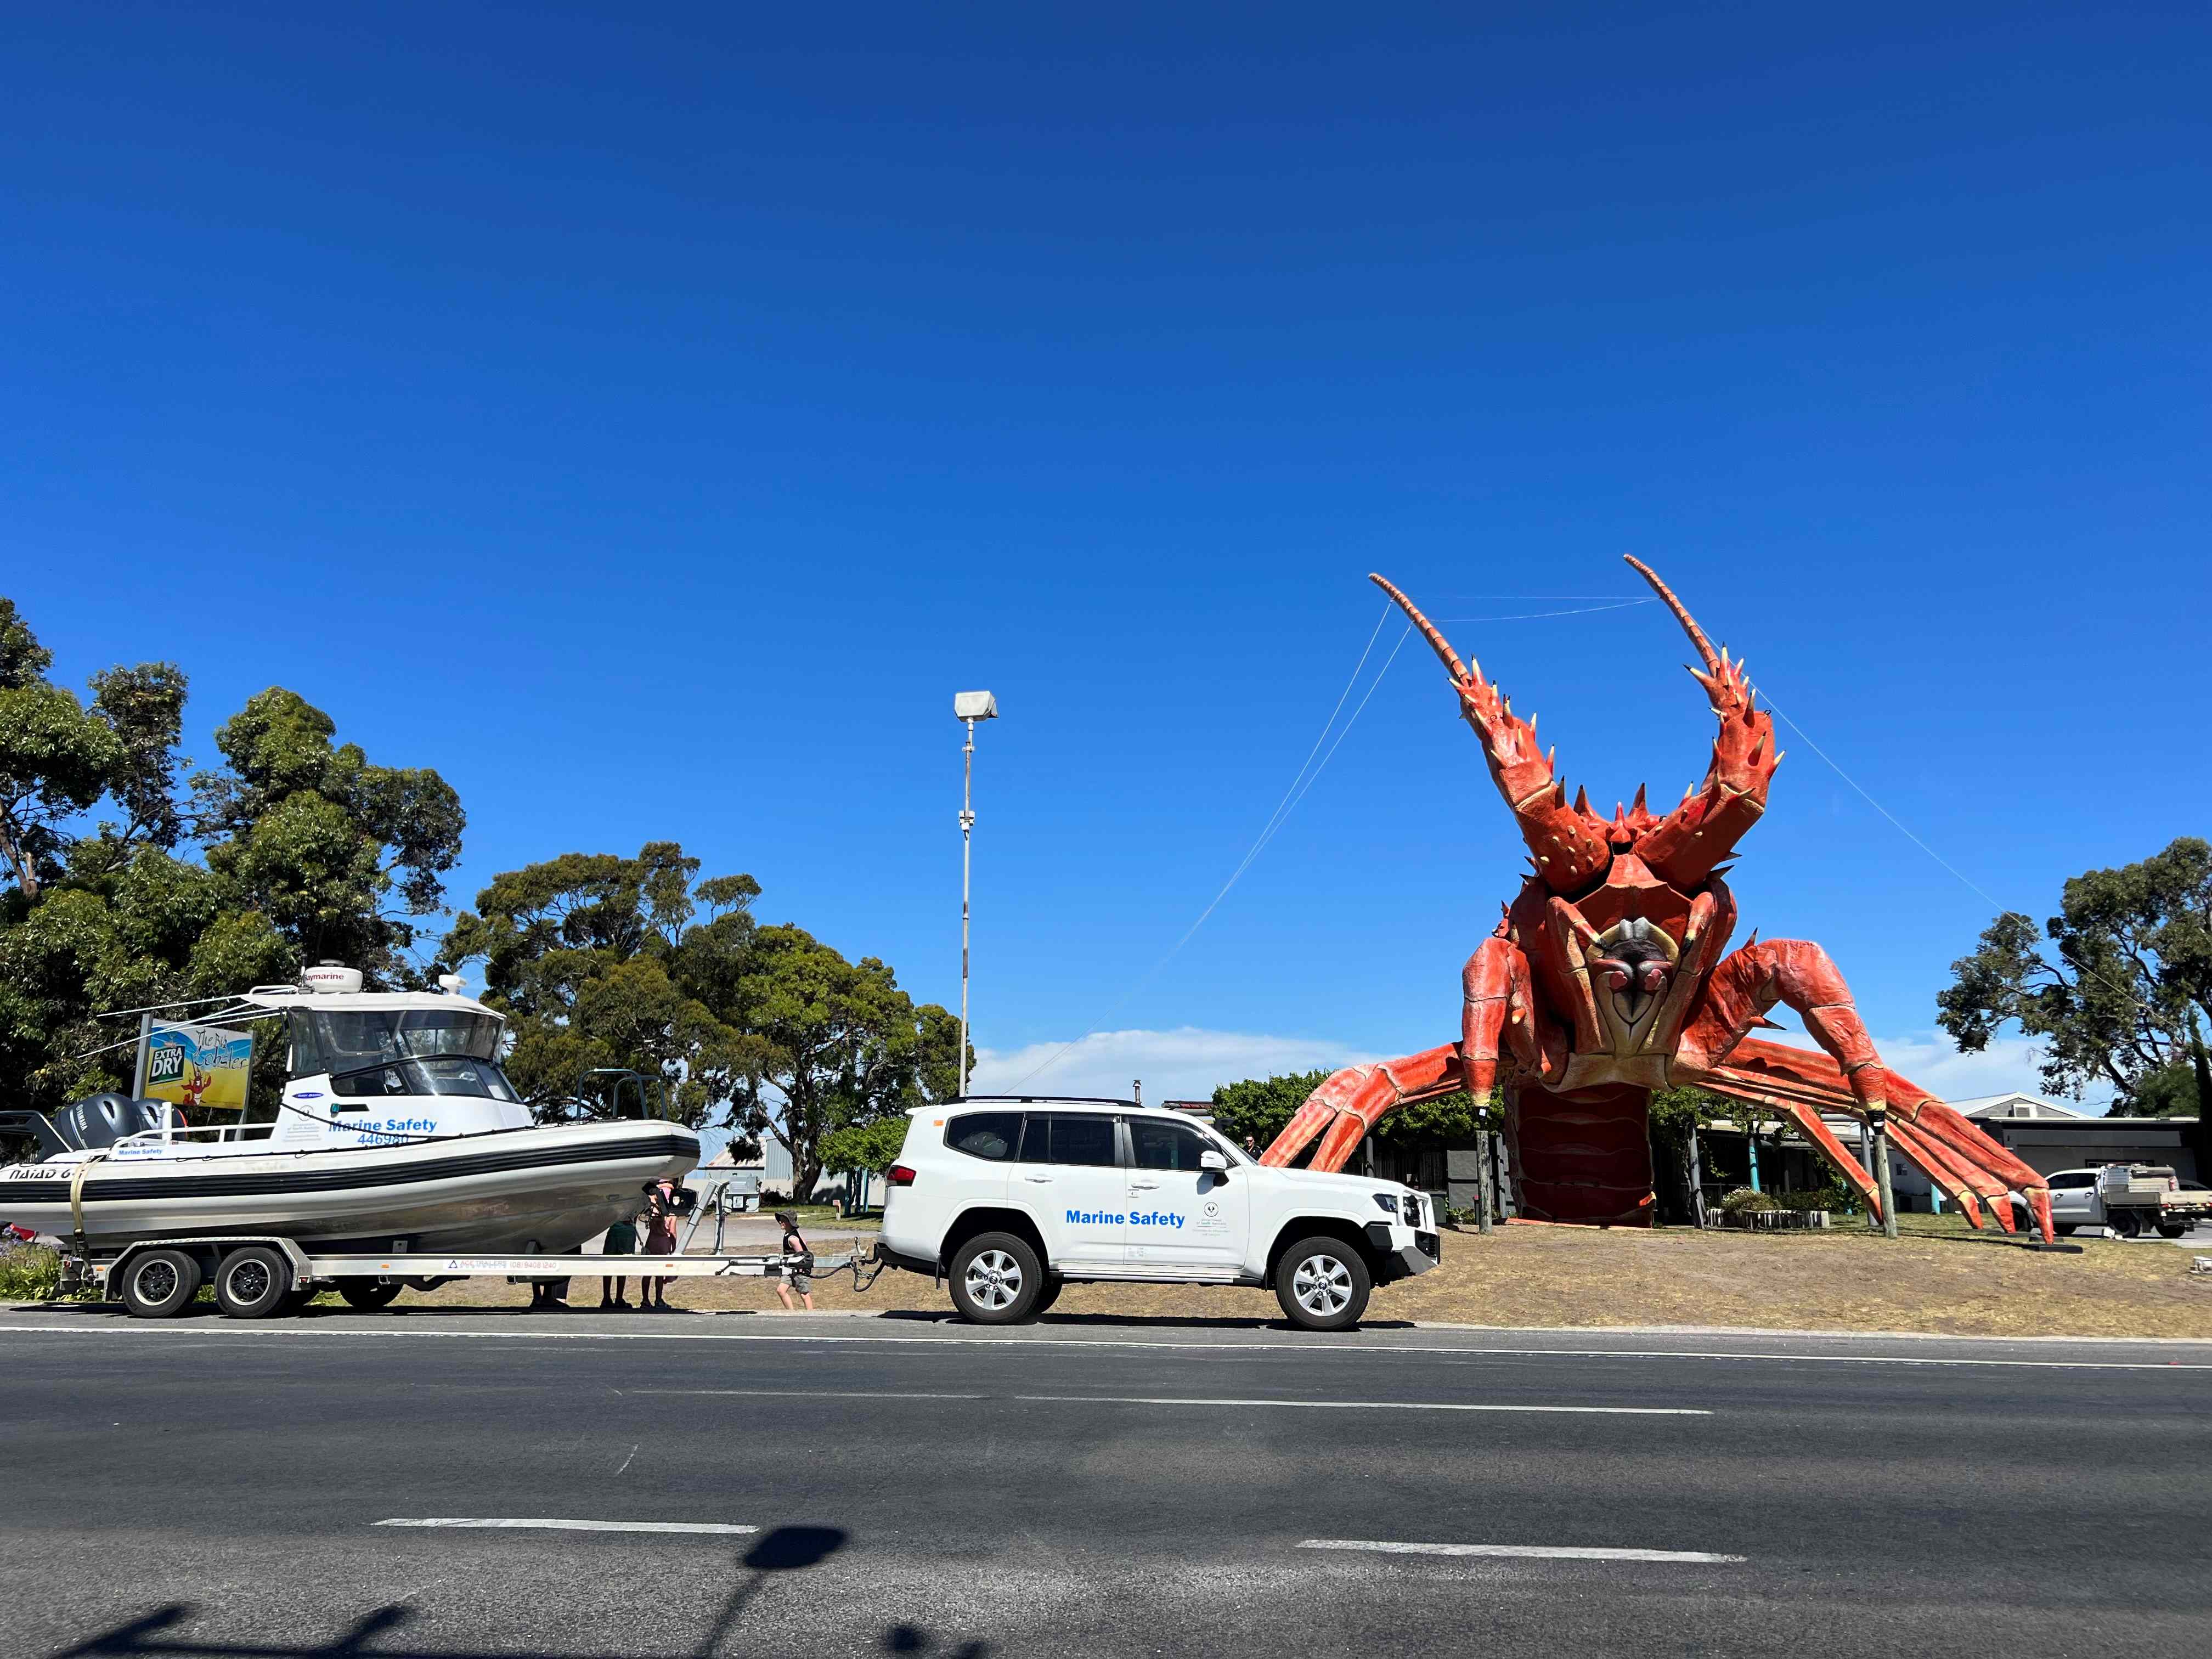 Big Lobster at Kingston with the Marine Safety SA car and boat in front of it